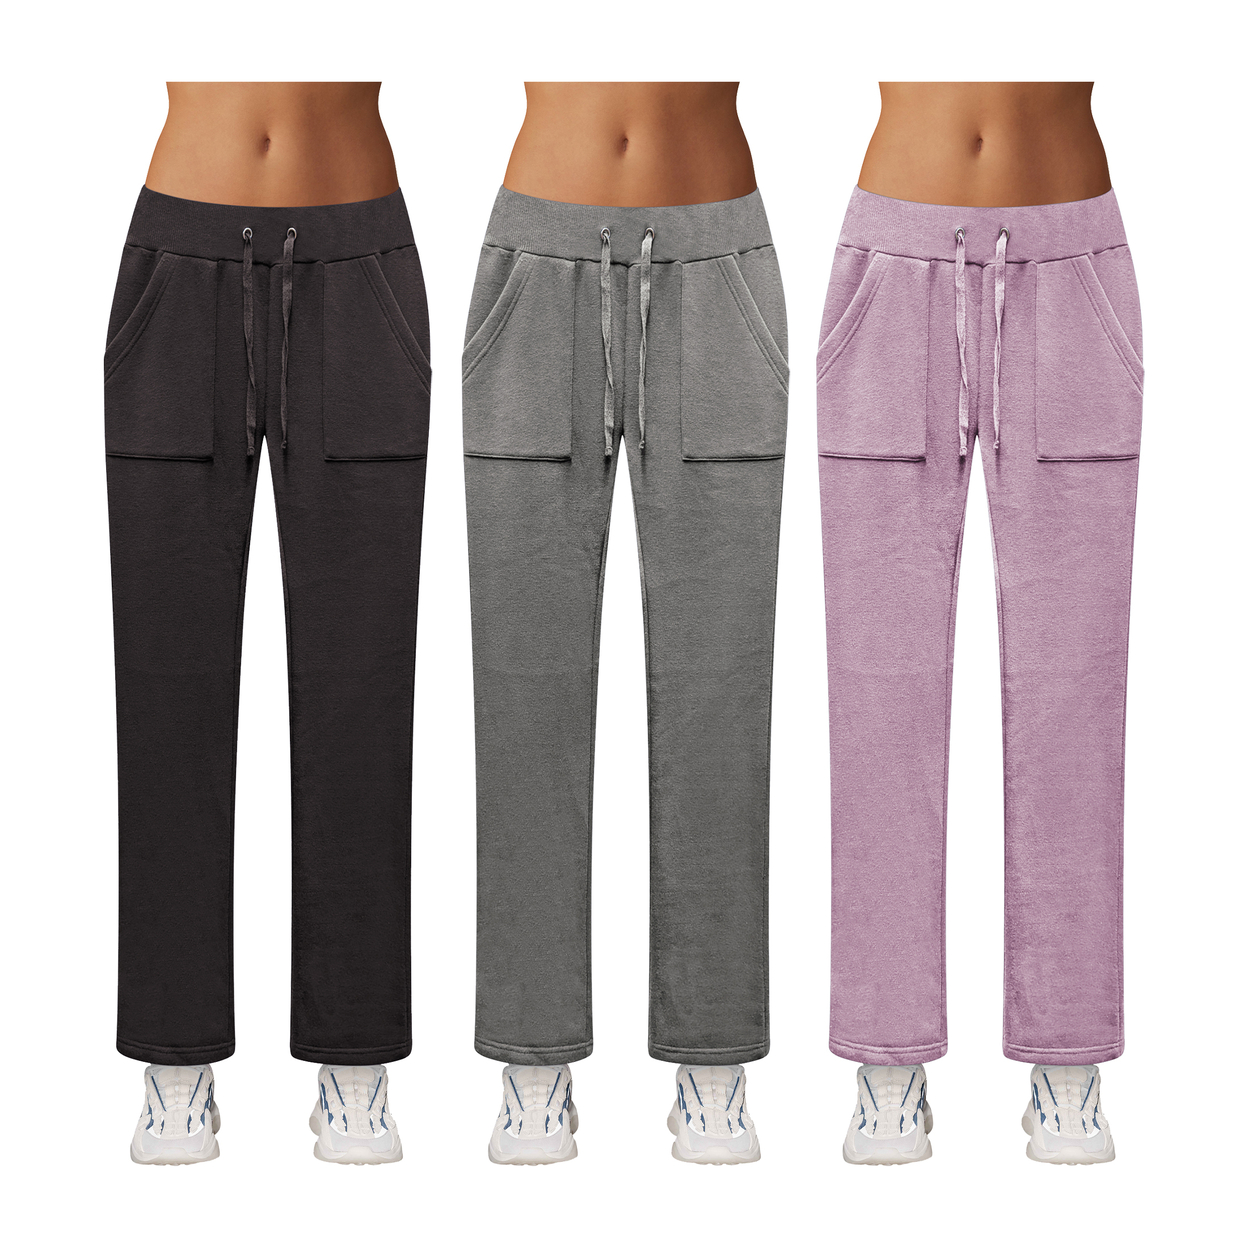 Multi-Pack: Women's Ultra-Soft Cozy Fleece Lined Elastic Waistband Terry Knit Pants - 1-Pack, Xx-large